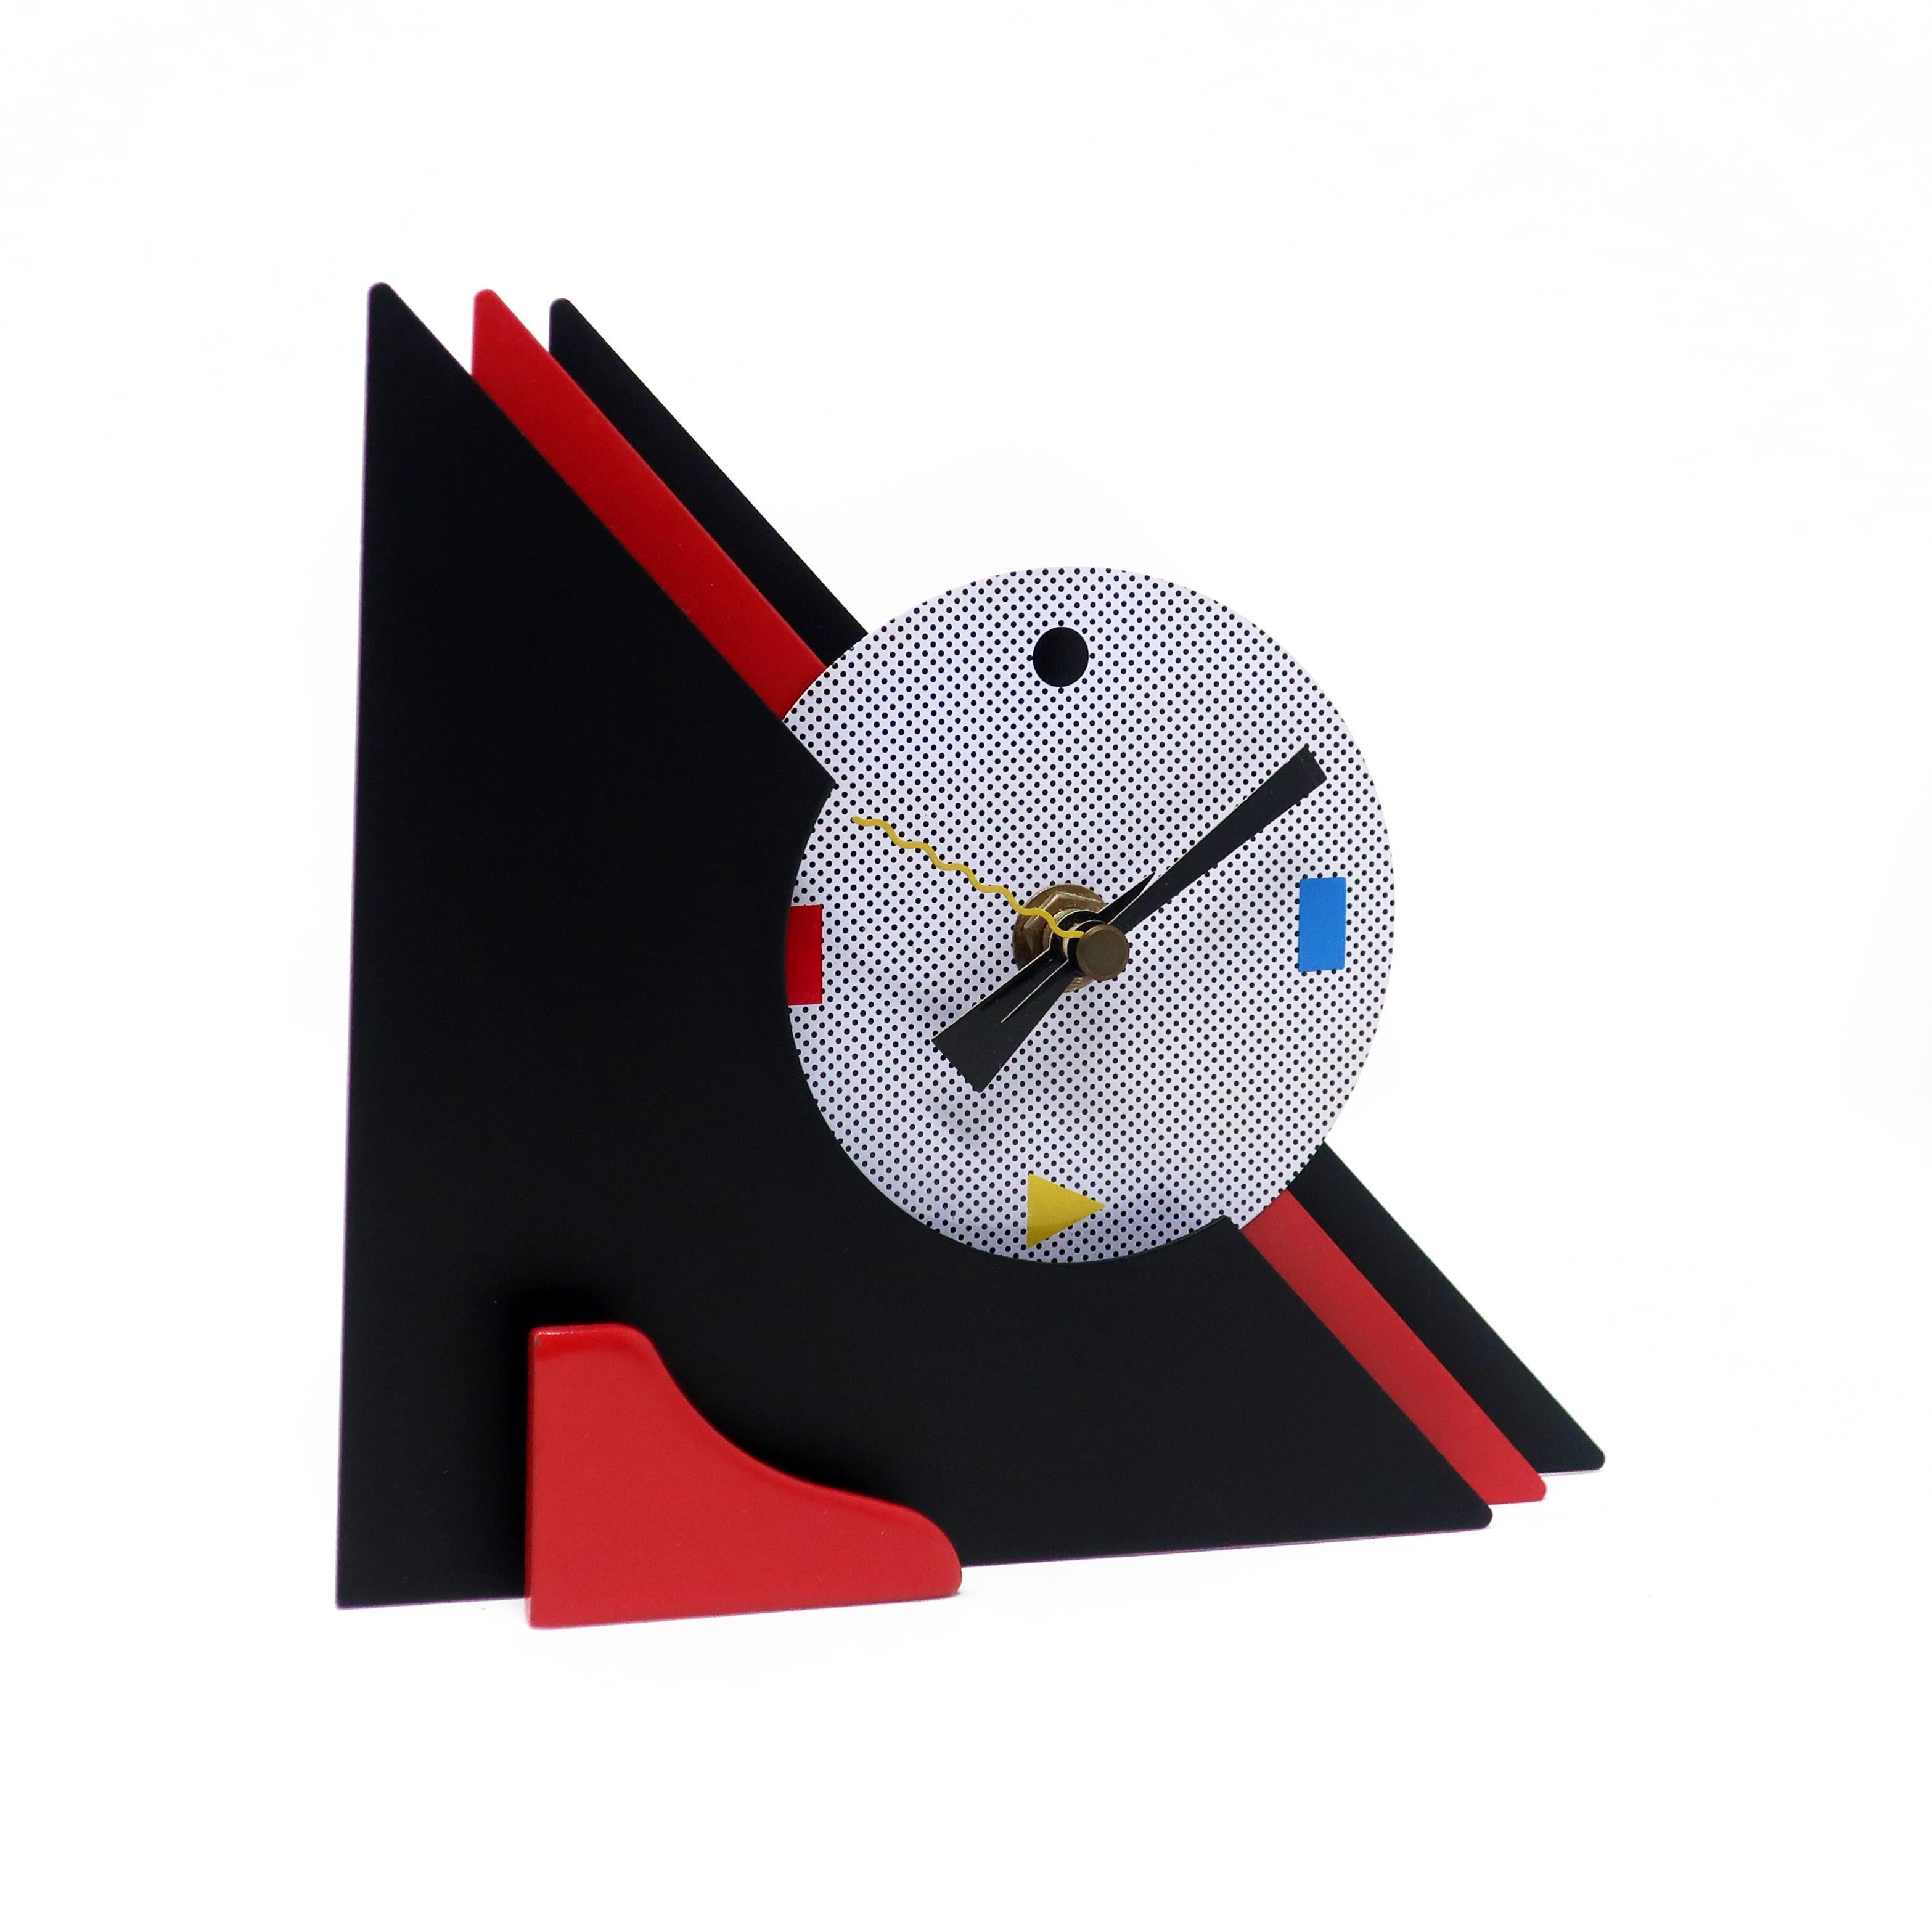 With a stunning combination of red and black enameled metal, red lucite accents, and primary colored shapes at 3, 6, and 9, this postmodern clock is designed with a stacked triangular design that gives it a rare and beautiful three dimensionality.